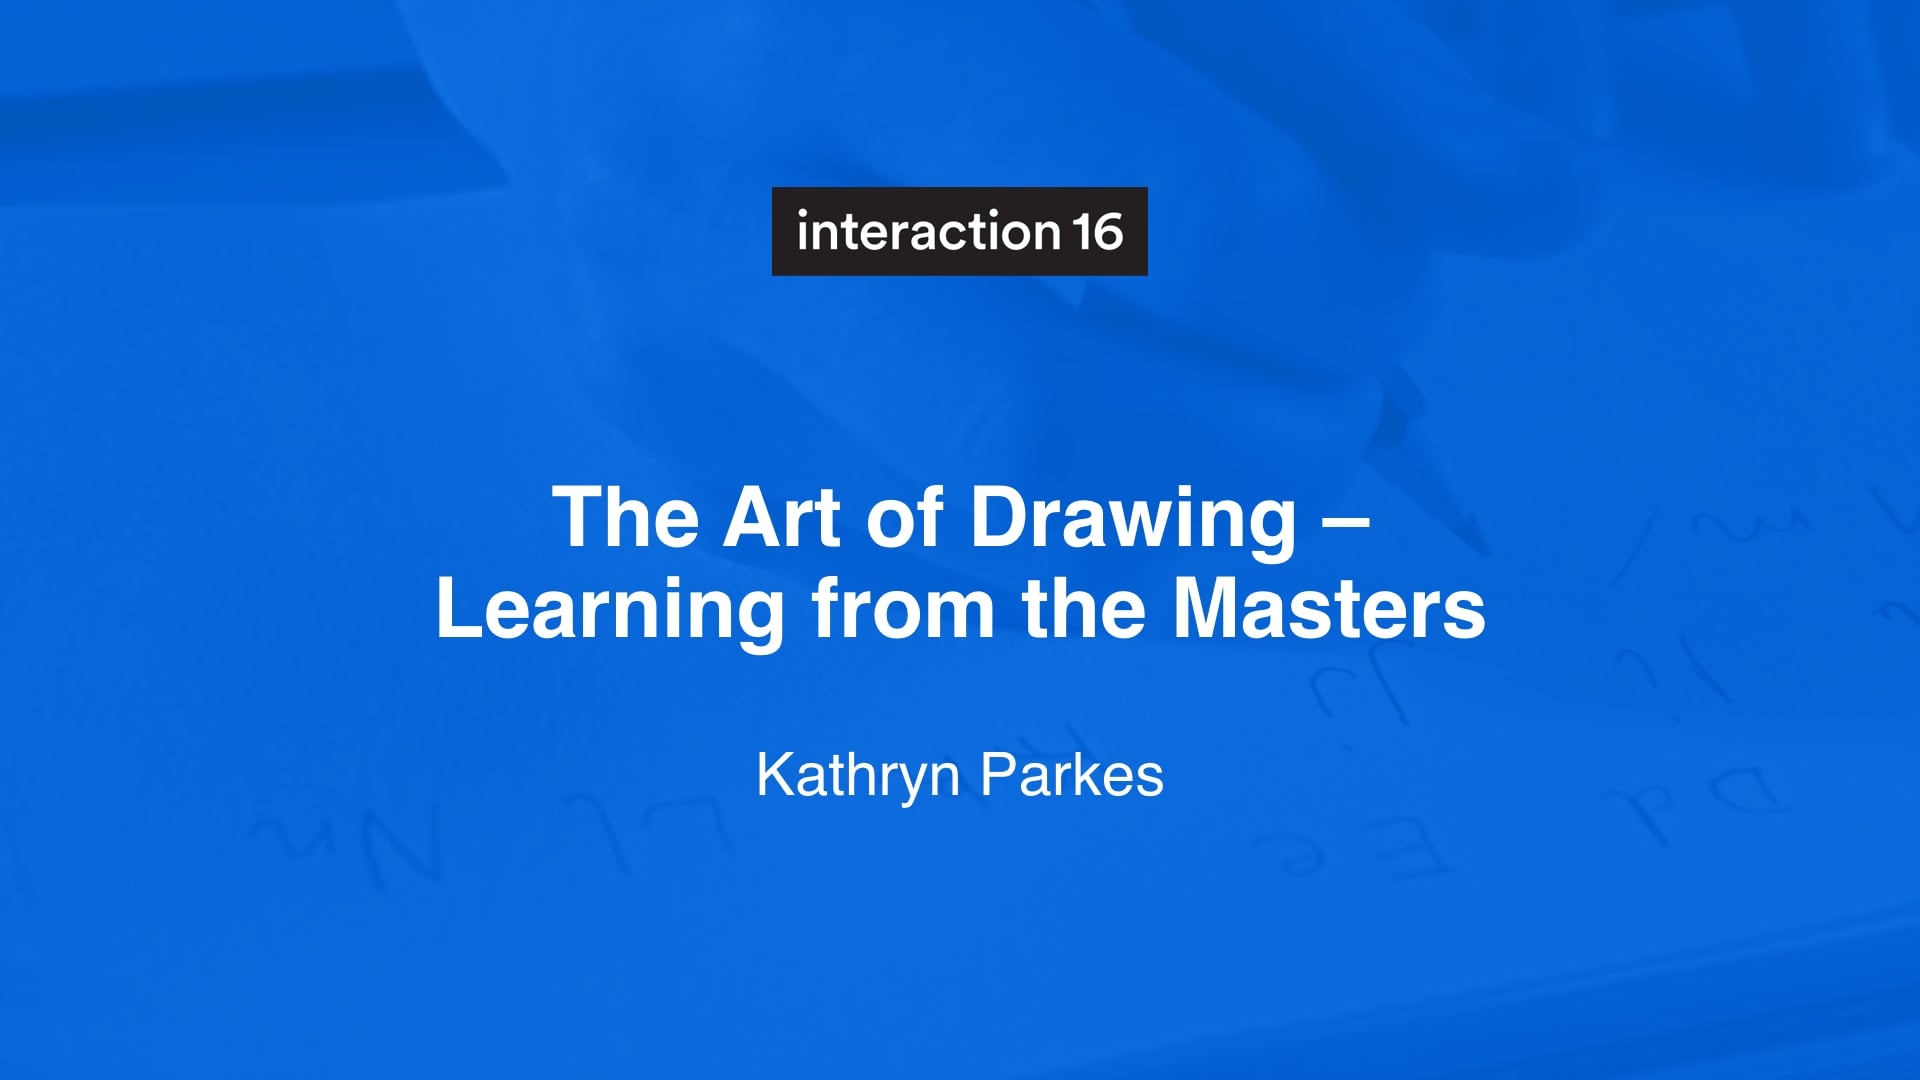 The Art of Drawing – Learning from the Masters